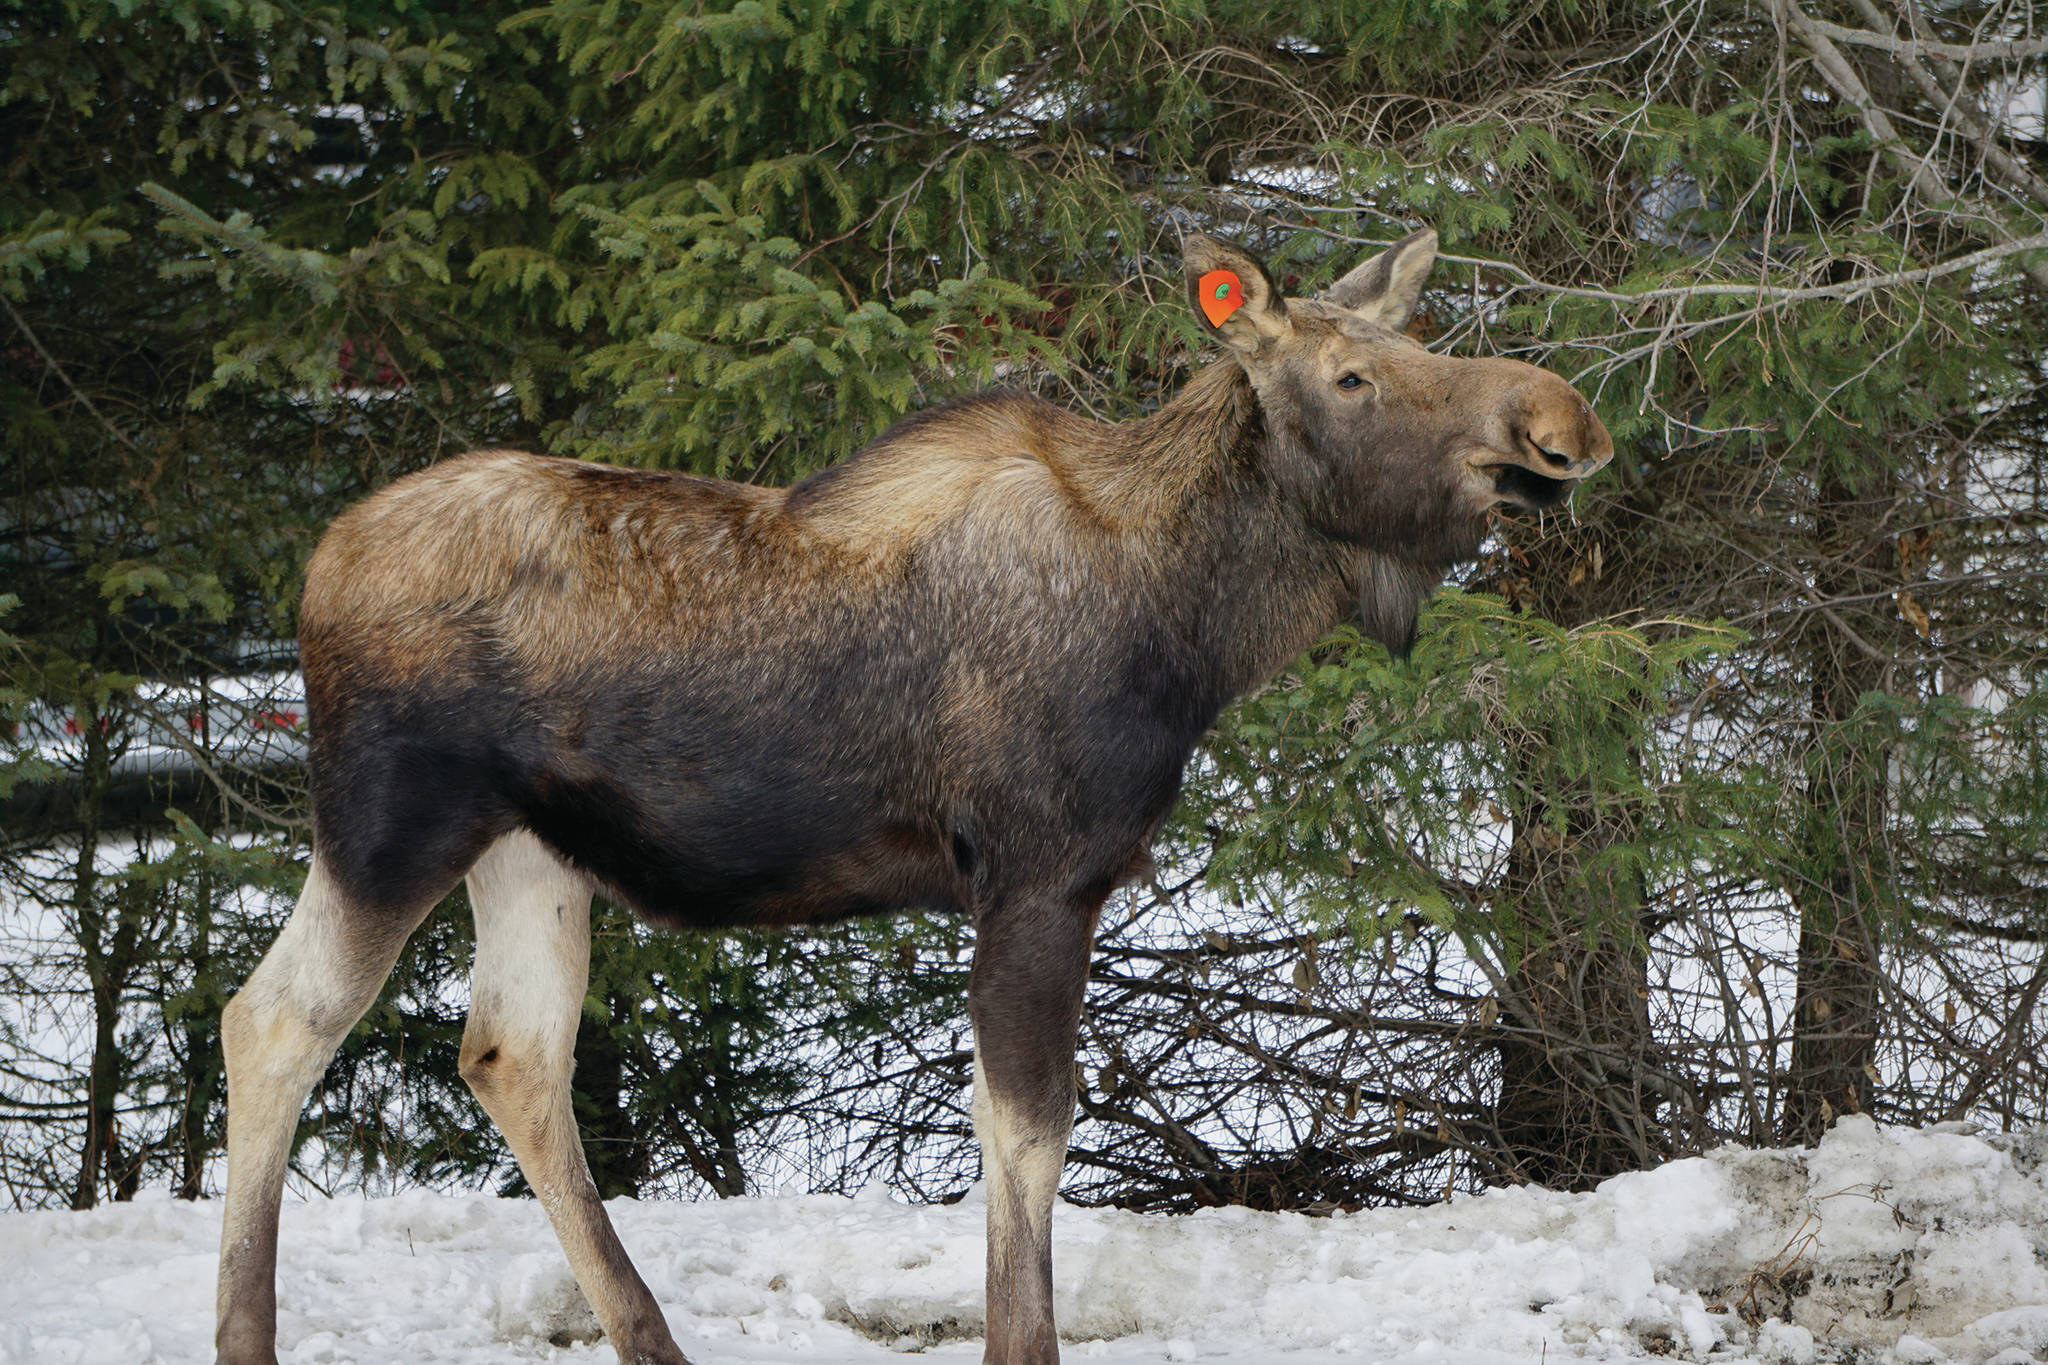 A moose with an orange ear tag feeds near the Homer News by Beluga Lake on Friday afternoon, March 6, 2020, in Homer, Alaska. Alaska Department of Fish and Game biologist Jason Harriman wrote in an email that the moose got tagged after it had been darted as a calf in 2017 when it got a compost bin lid stuck on its head. “It appears to have grown up healthy after the incident,” he wrote. “(It’s) good to see she is still around.” (Photo by Michael Armstrong/Homer News)